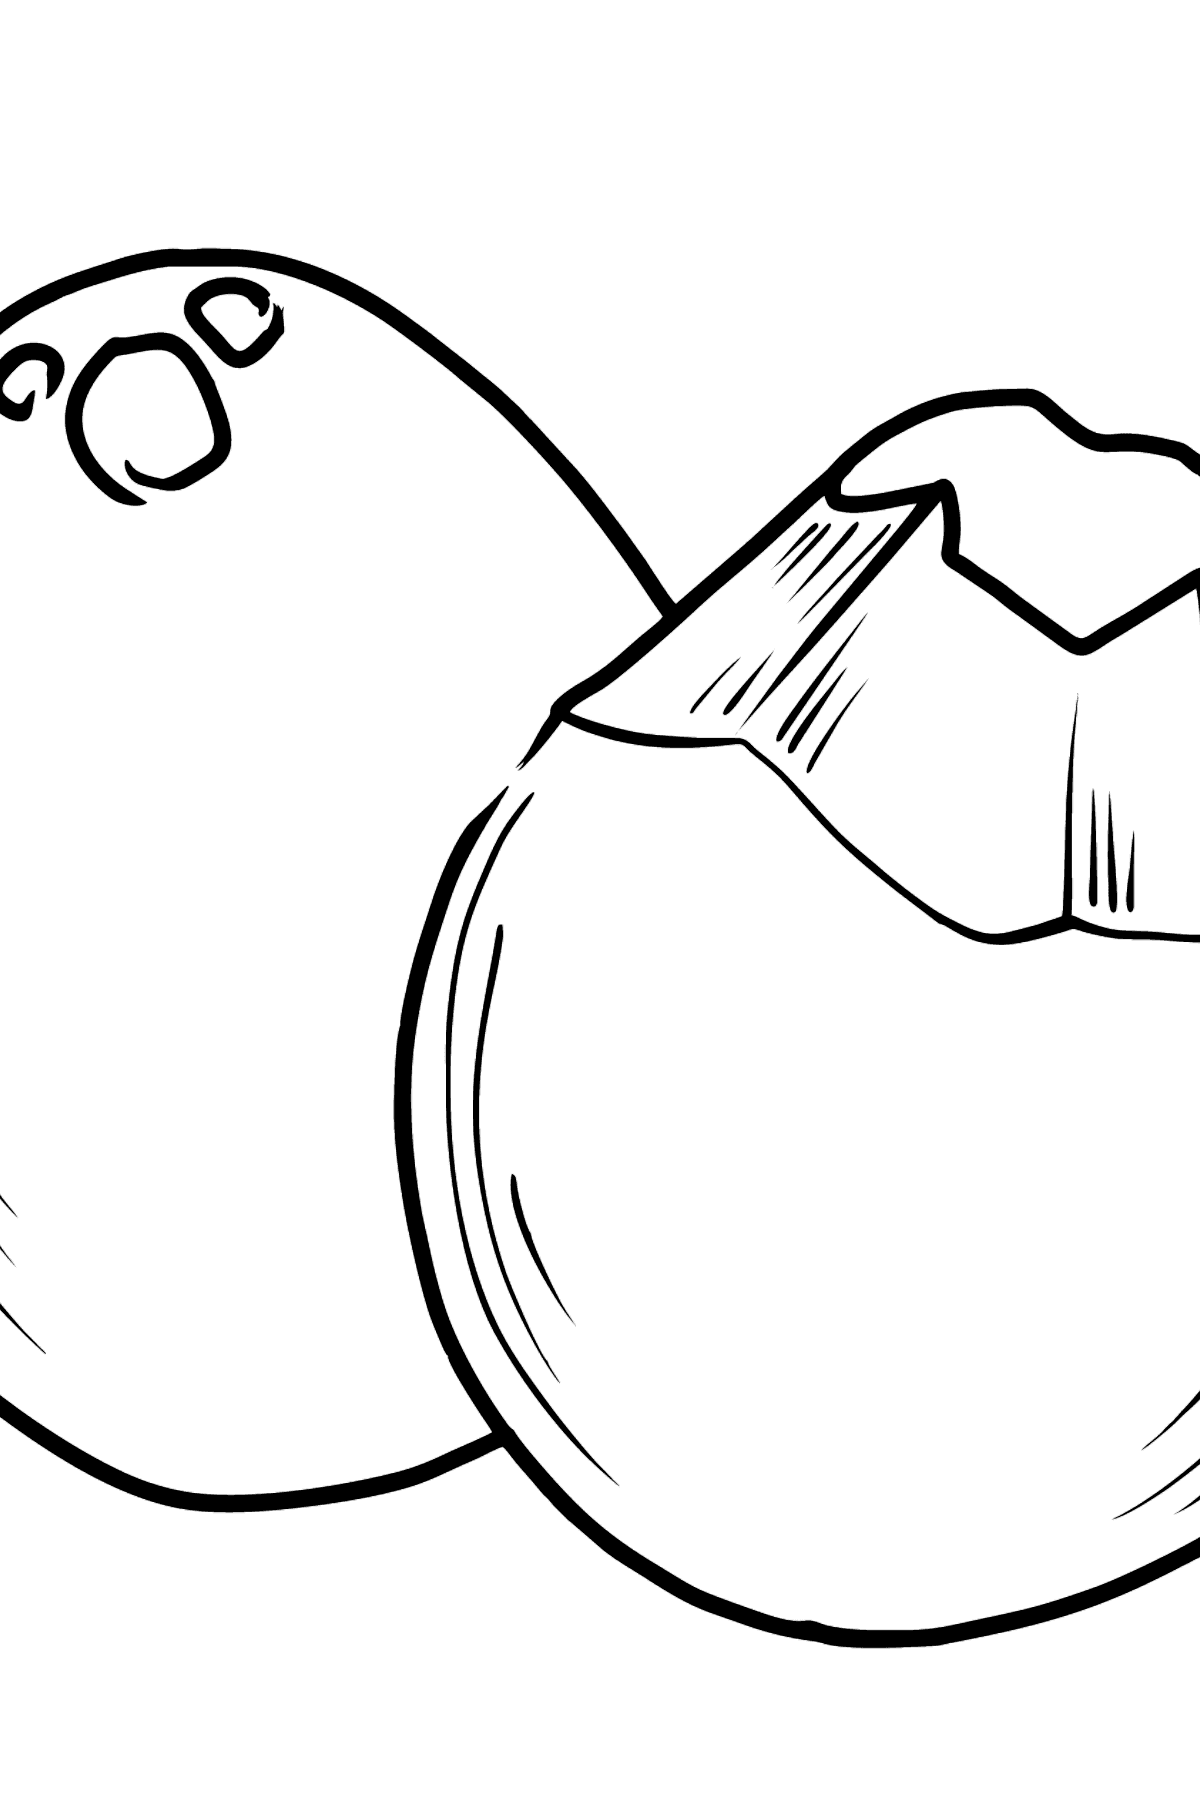 Coconut coloring page - Coloring Pages for Kids